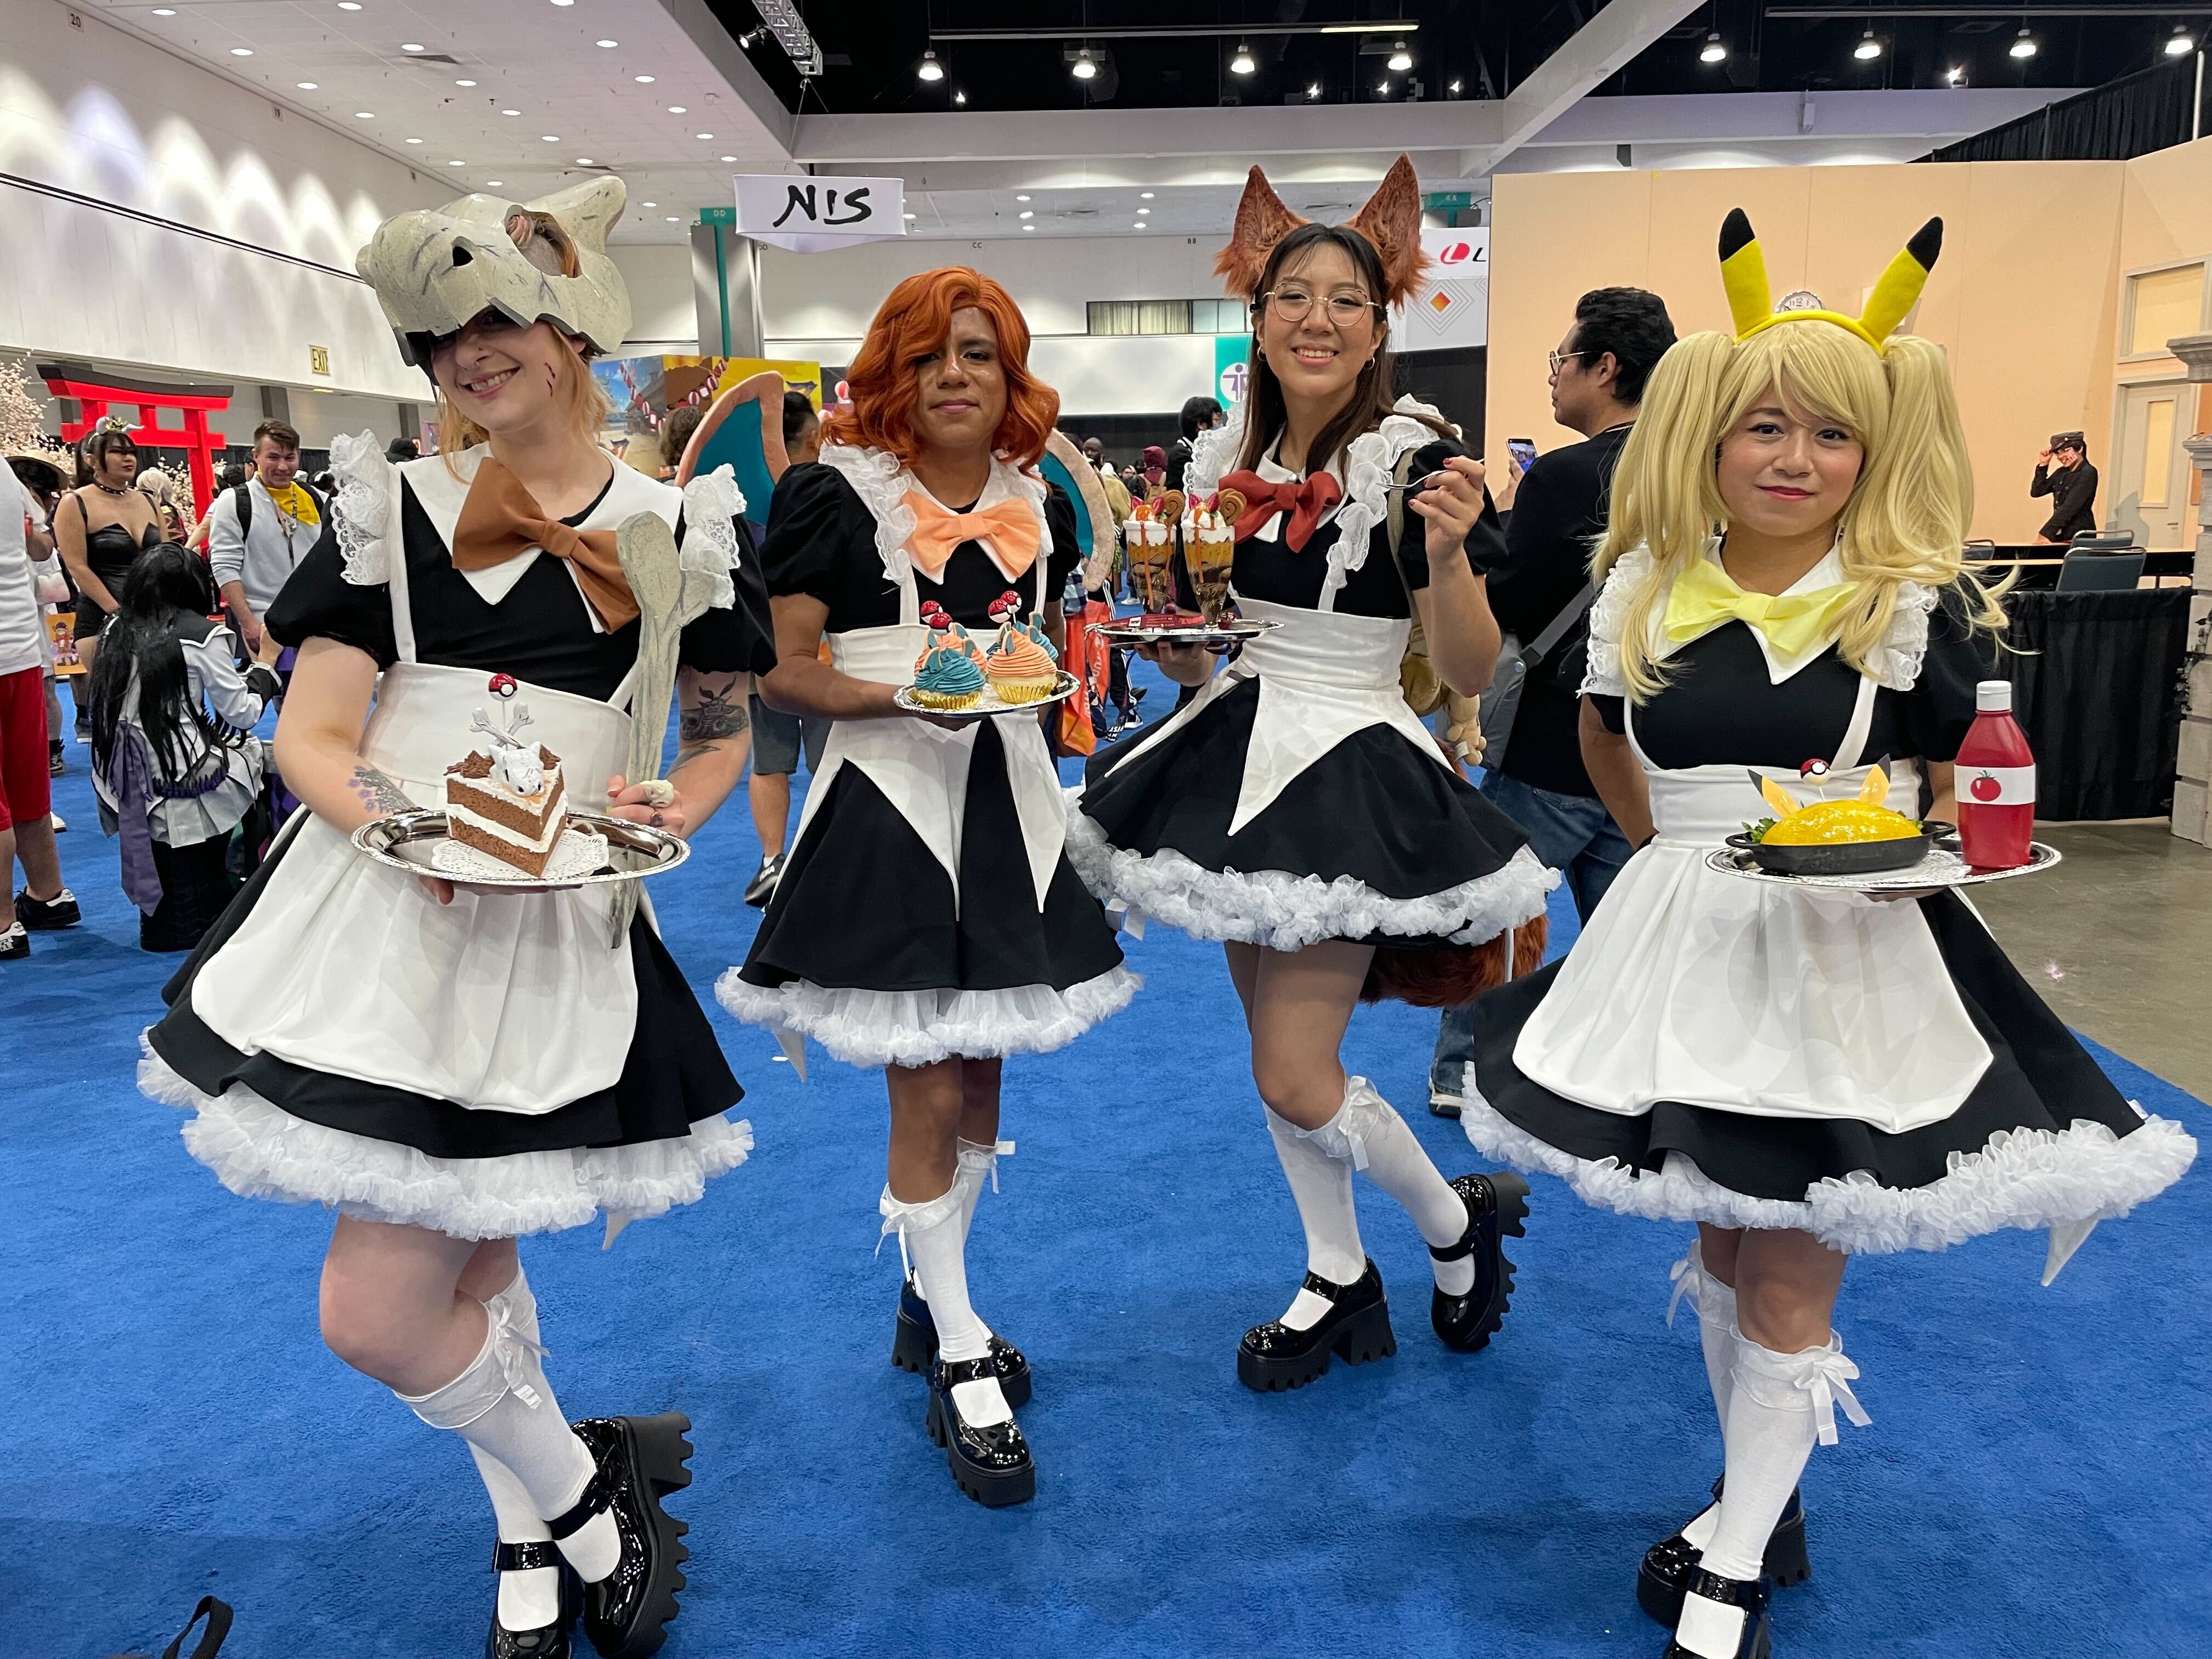 What to Wear to an Anime Convention Without Cosplay - Buy and Slay